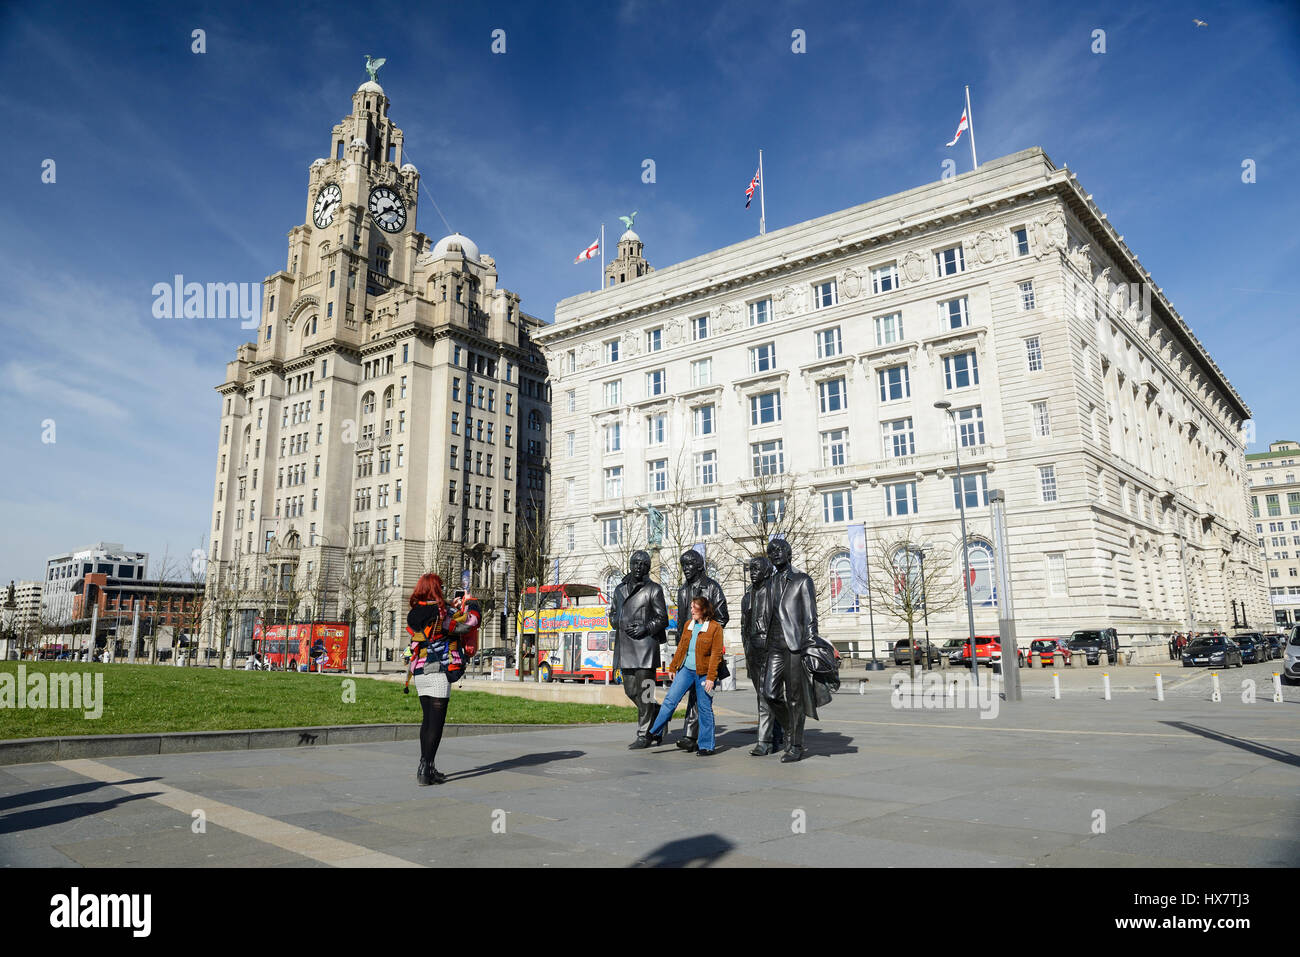 Tourists pose for photographs with the statues of the world famous 1960's group, The Beatles. Statues of the famous Liverpool Group The Beatles situat Stock Photo